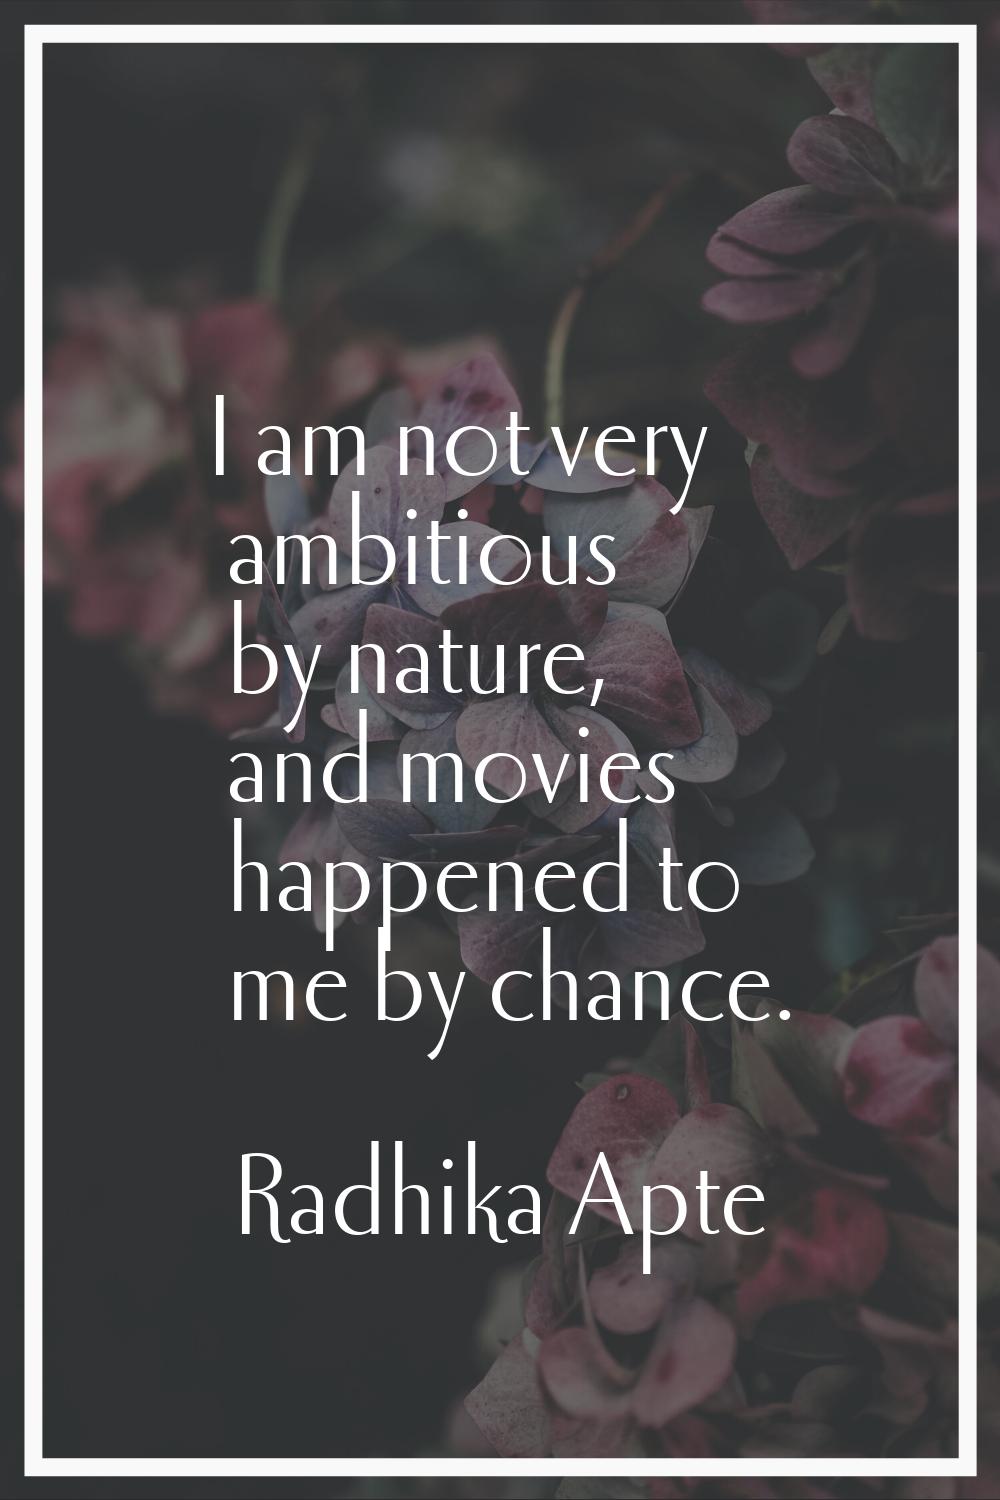 I am not very ambitious by nature, and movies happened to me by chance.